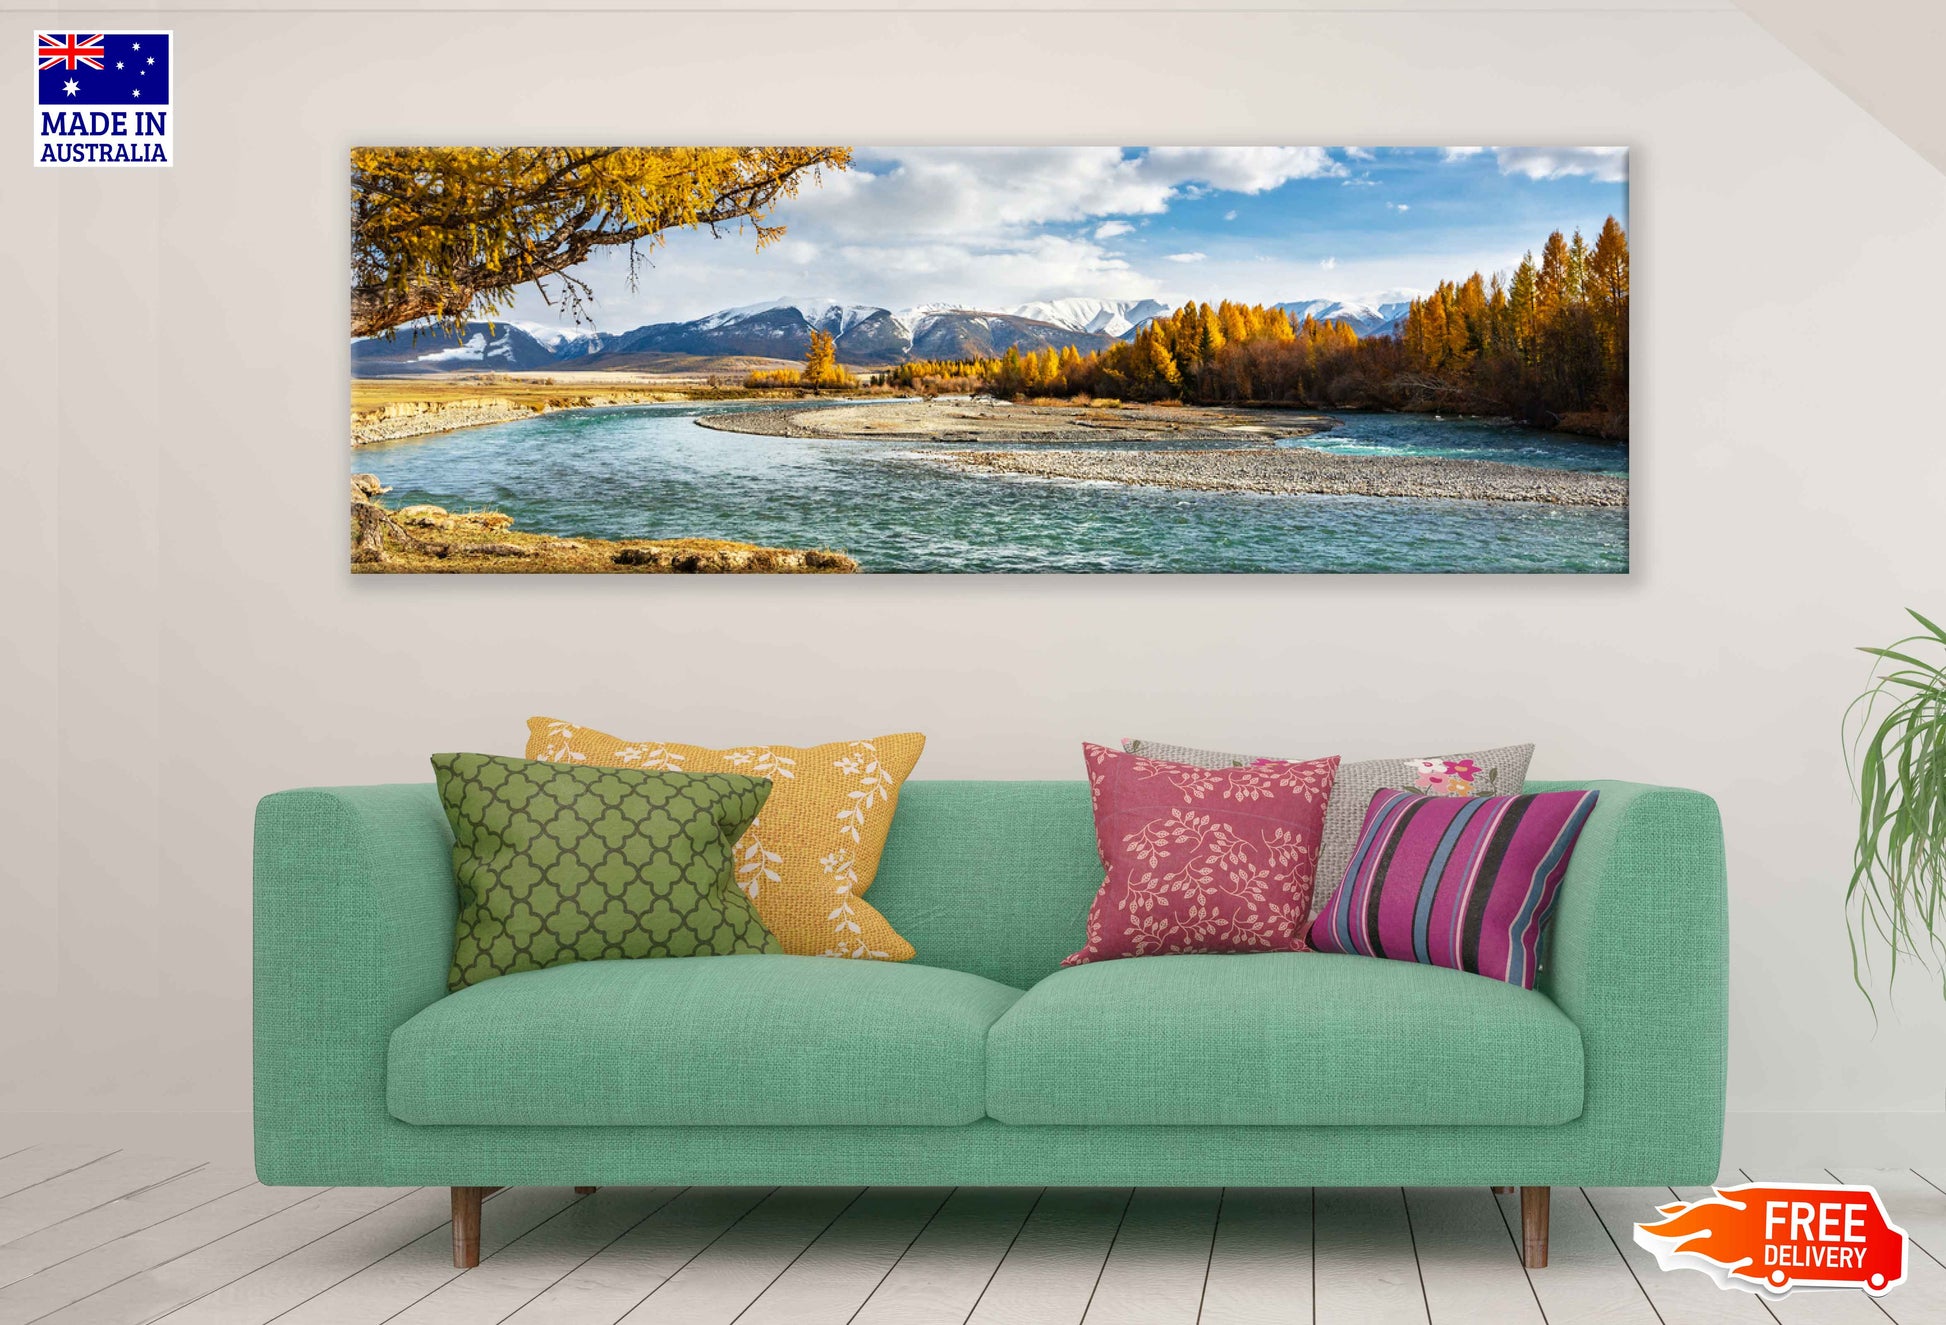 Panoramic Canvas Autumn Trees & Lake View Photograph High Quality 100% Australian Made Wall Canvas Print Ready to Hang